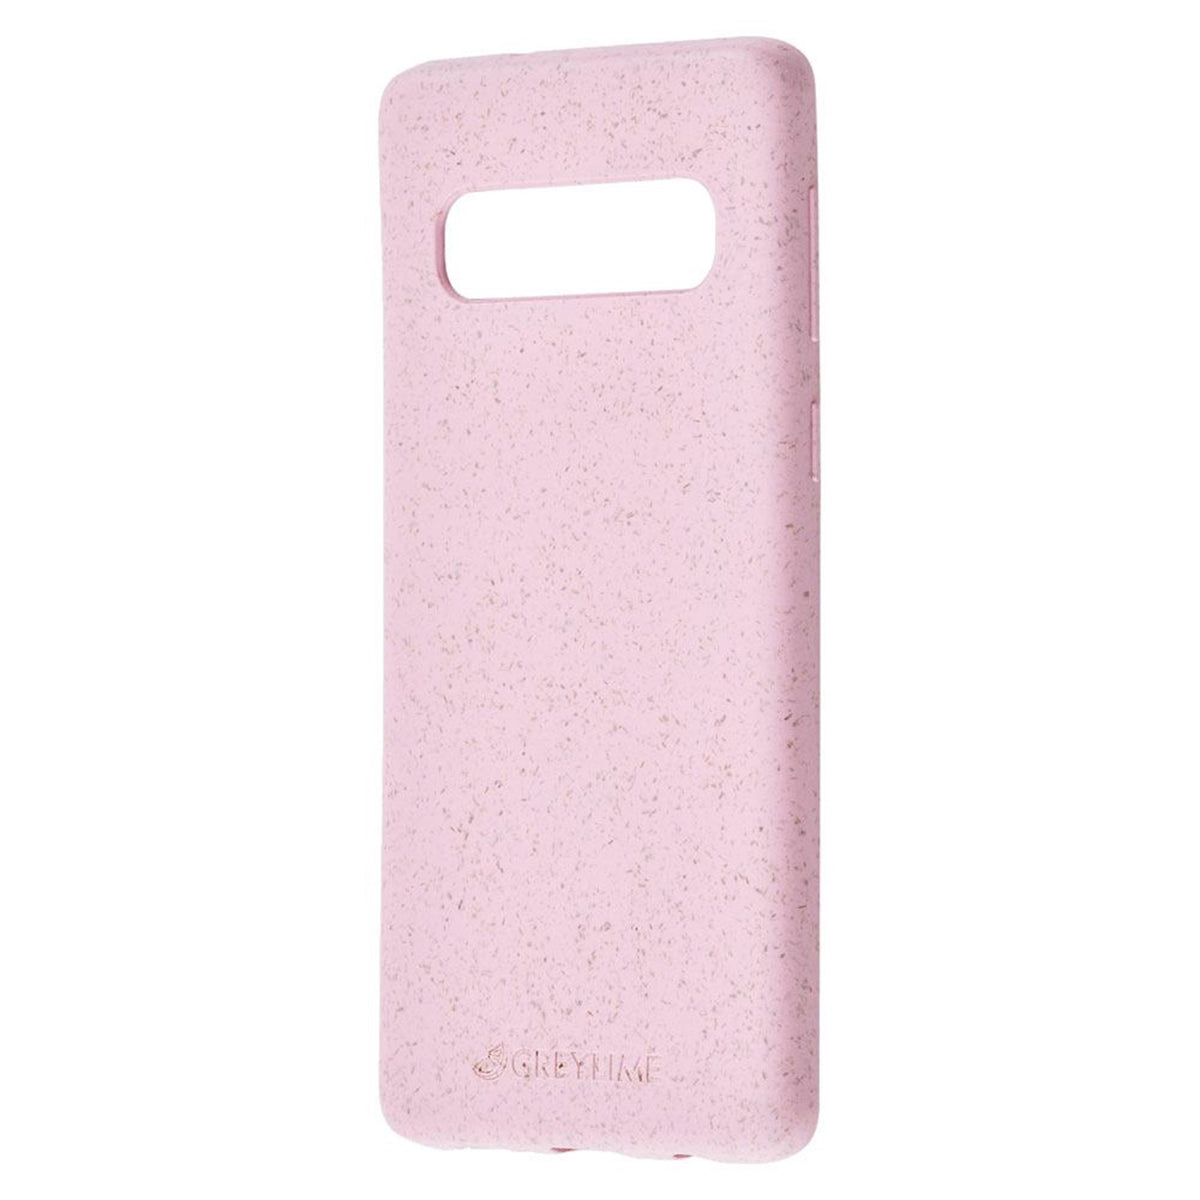 GreyLime-Samsung-Galaxy-S10-biodegradable-cover-Pink-COSAM1005-V2.jpg